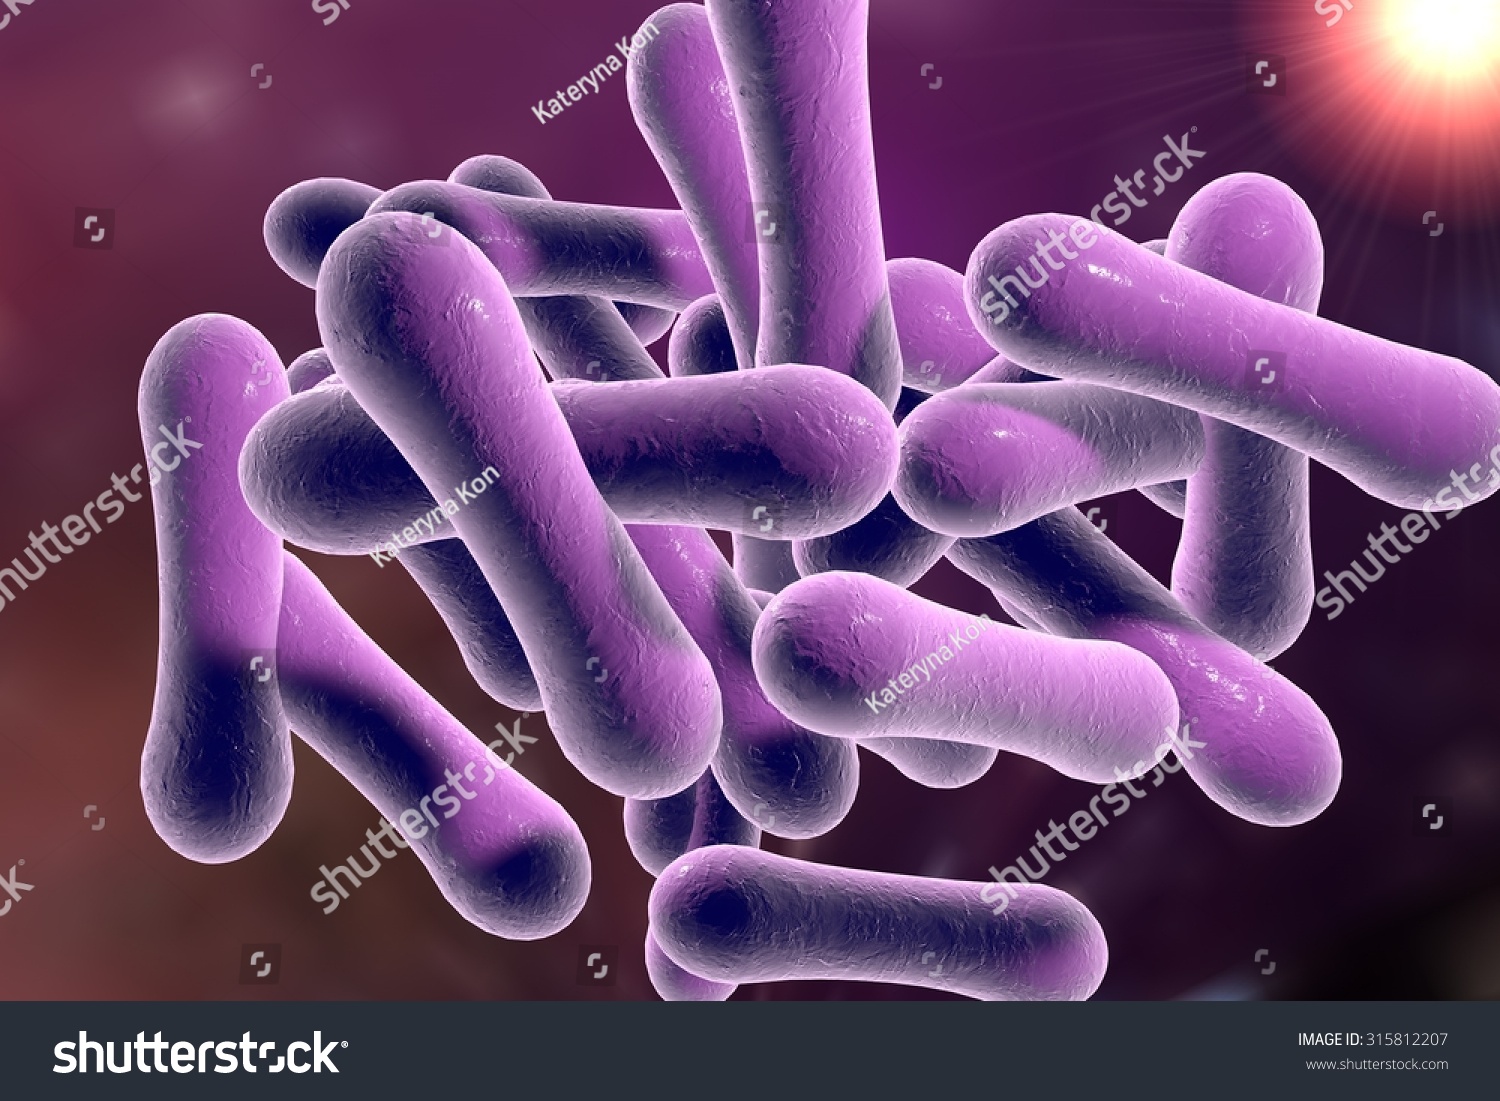 Microscopic Illustration Of Corynebacterium Diphtheria Gram Positive Rod Shaped Bacterium Which